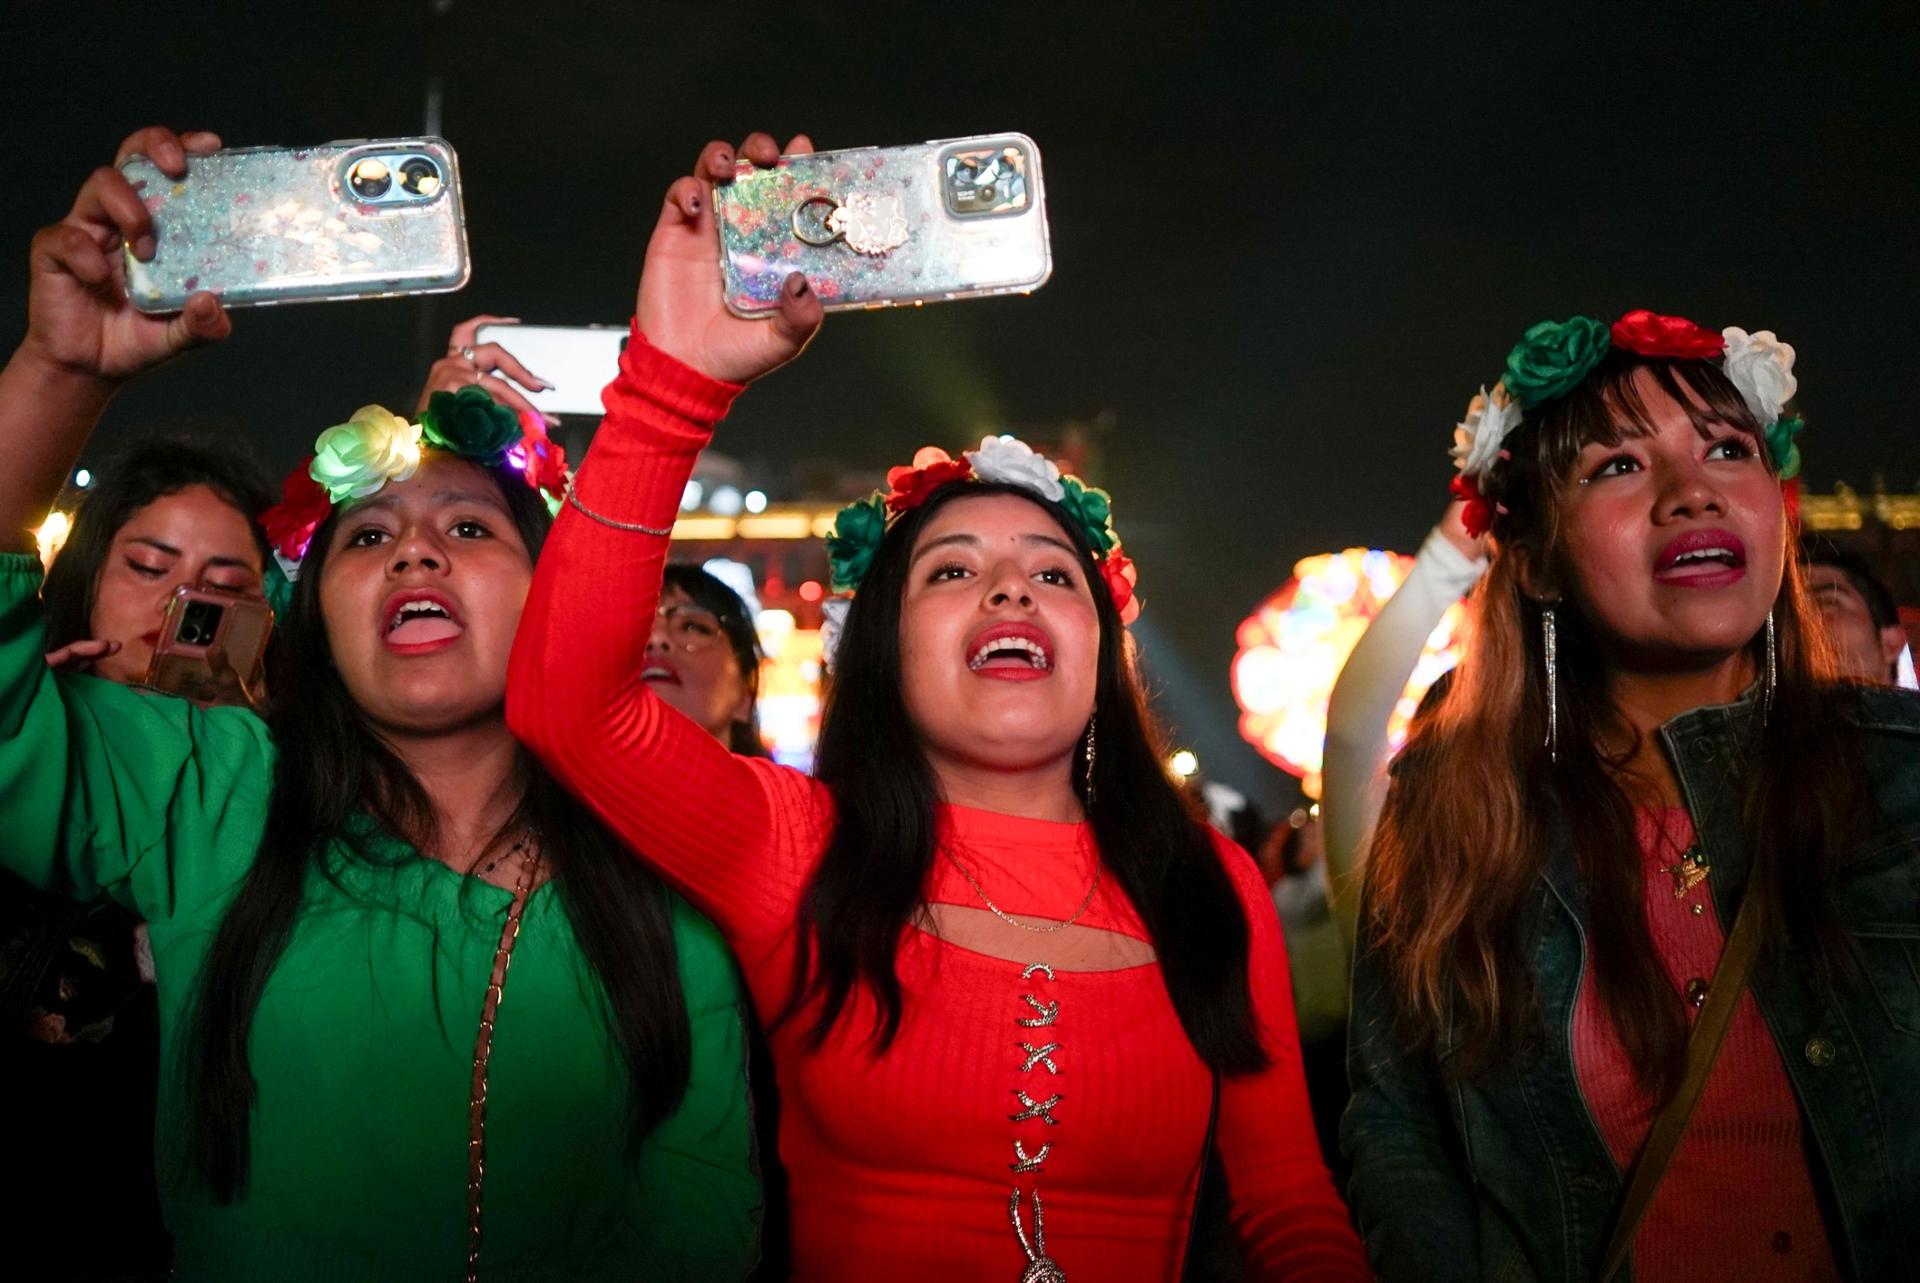 Three young women in red and green celebrate with their phones held up to capture the performance. 